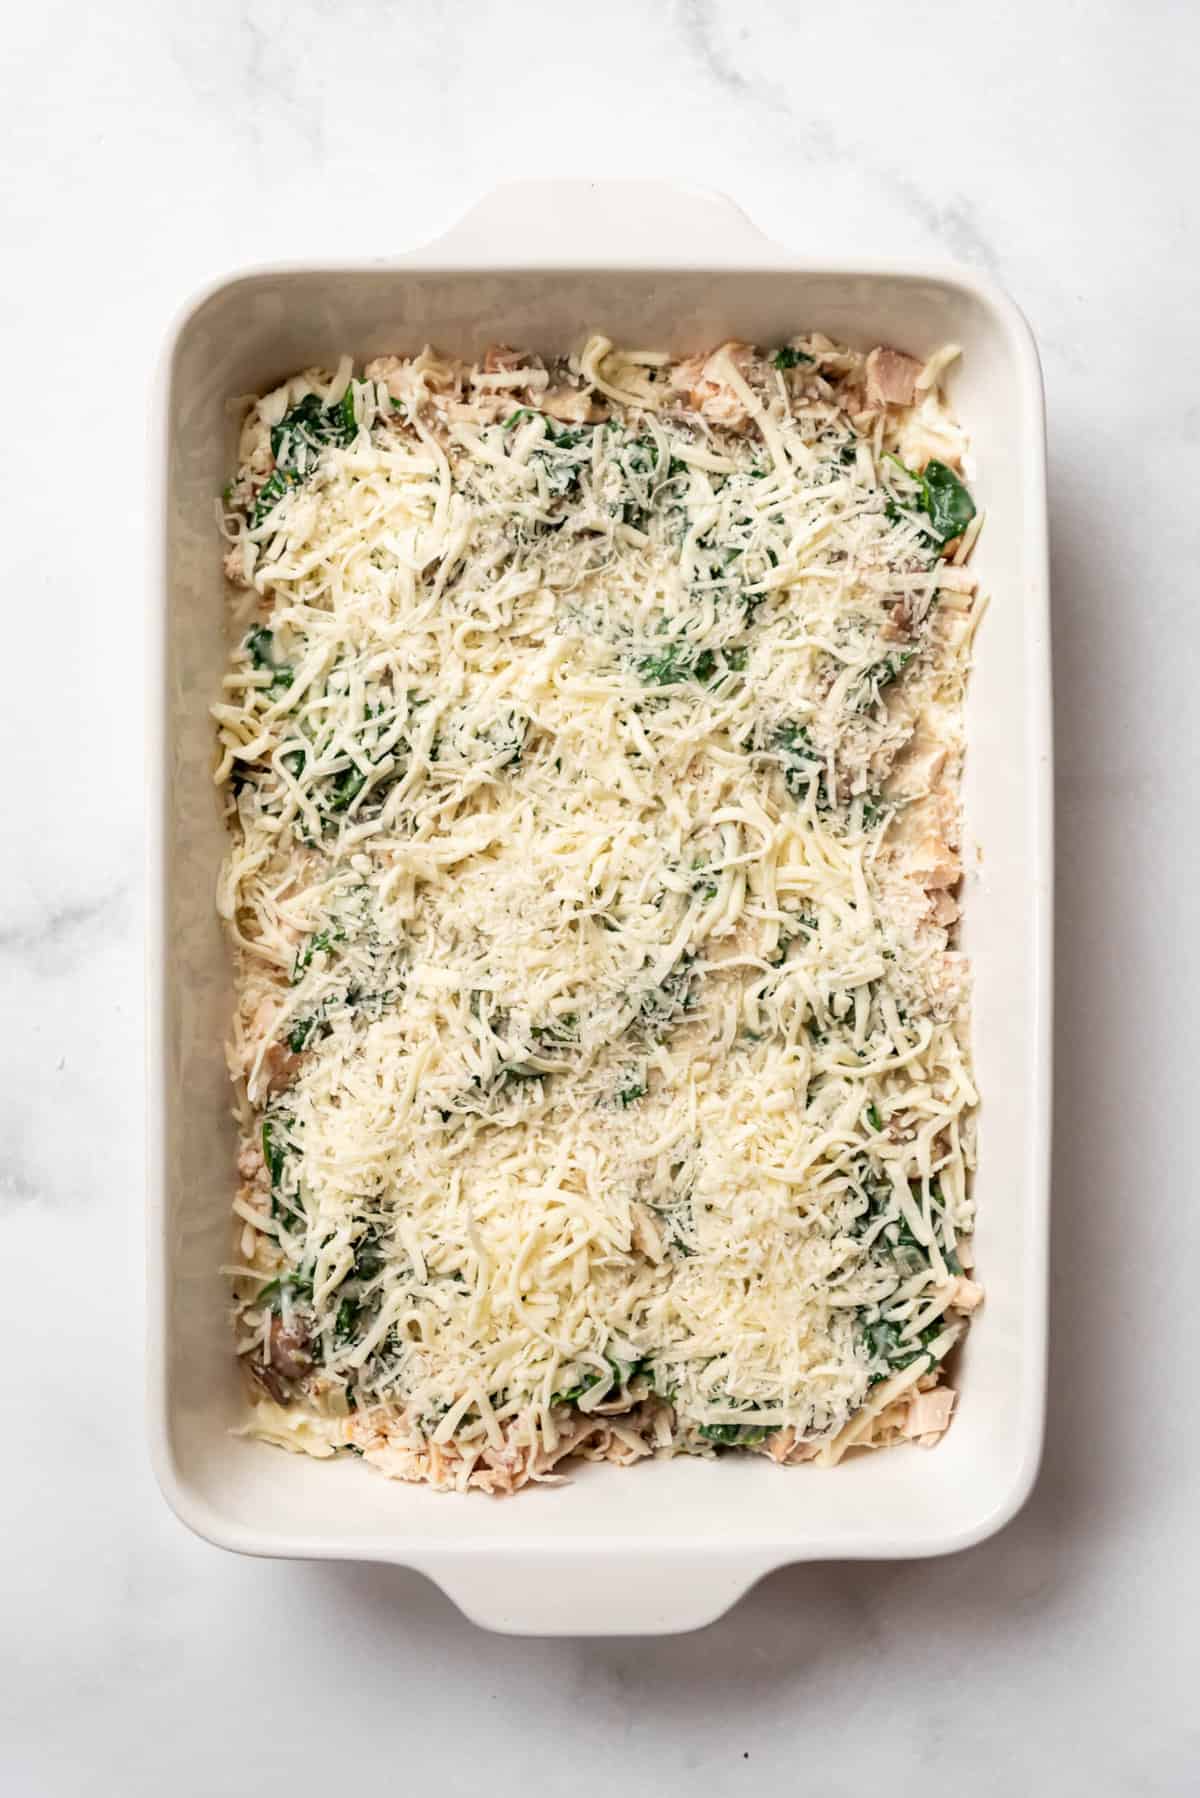 Sprinkling mozzarella and parmesan cheese over lasagna layers in a white casserole dish.